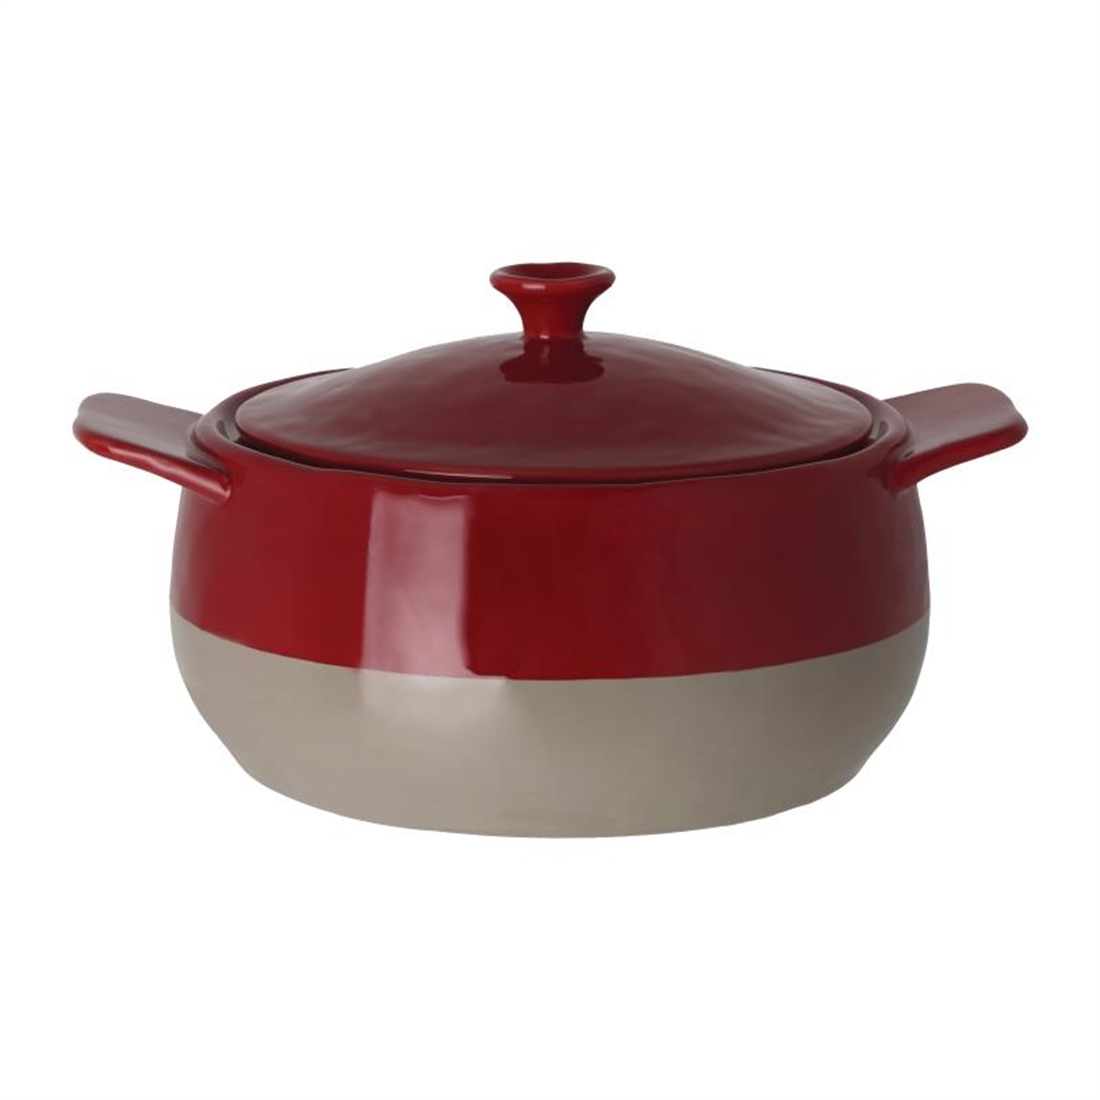 Olympia Red And Taupe Round Casserole Dish 1.8Ltr